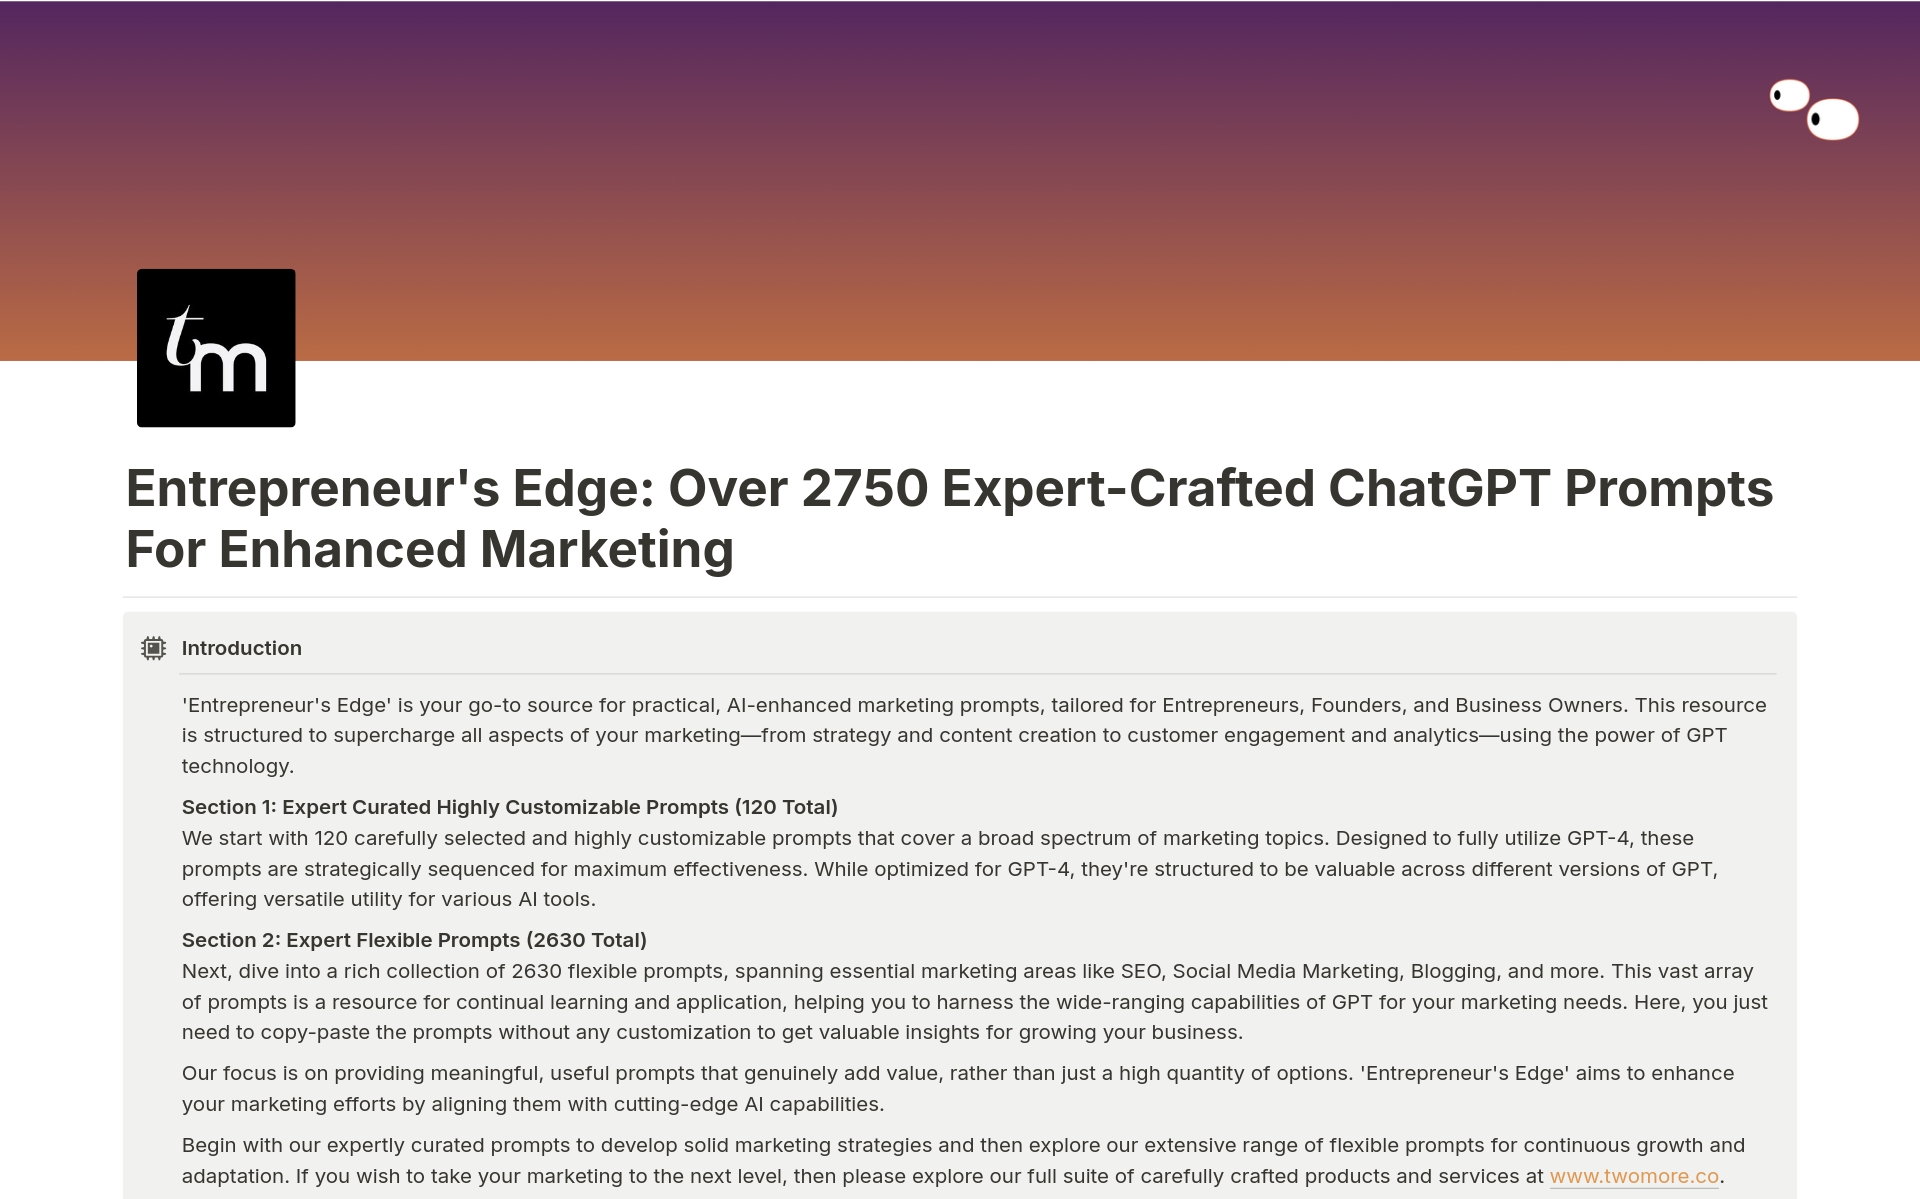 Mallin esikatselu nimelle Expert-Crafted Marketing Prompts for ChatGPT 